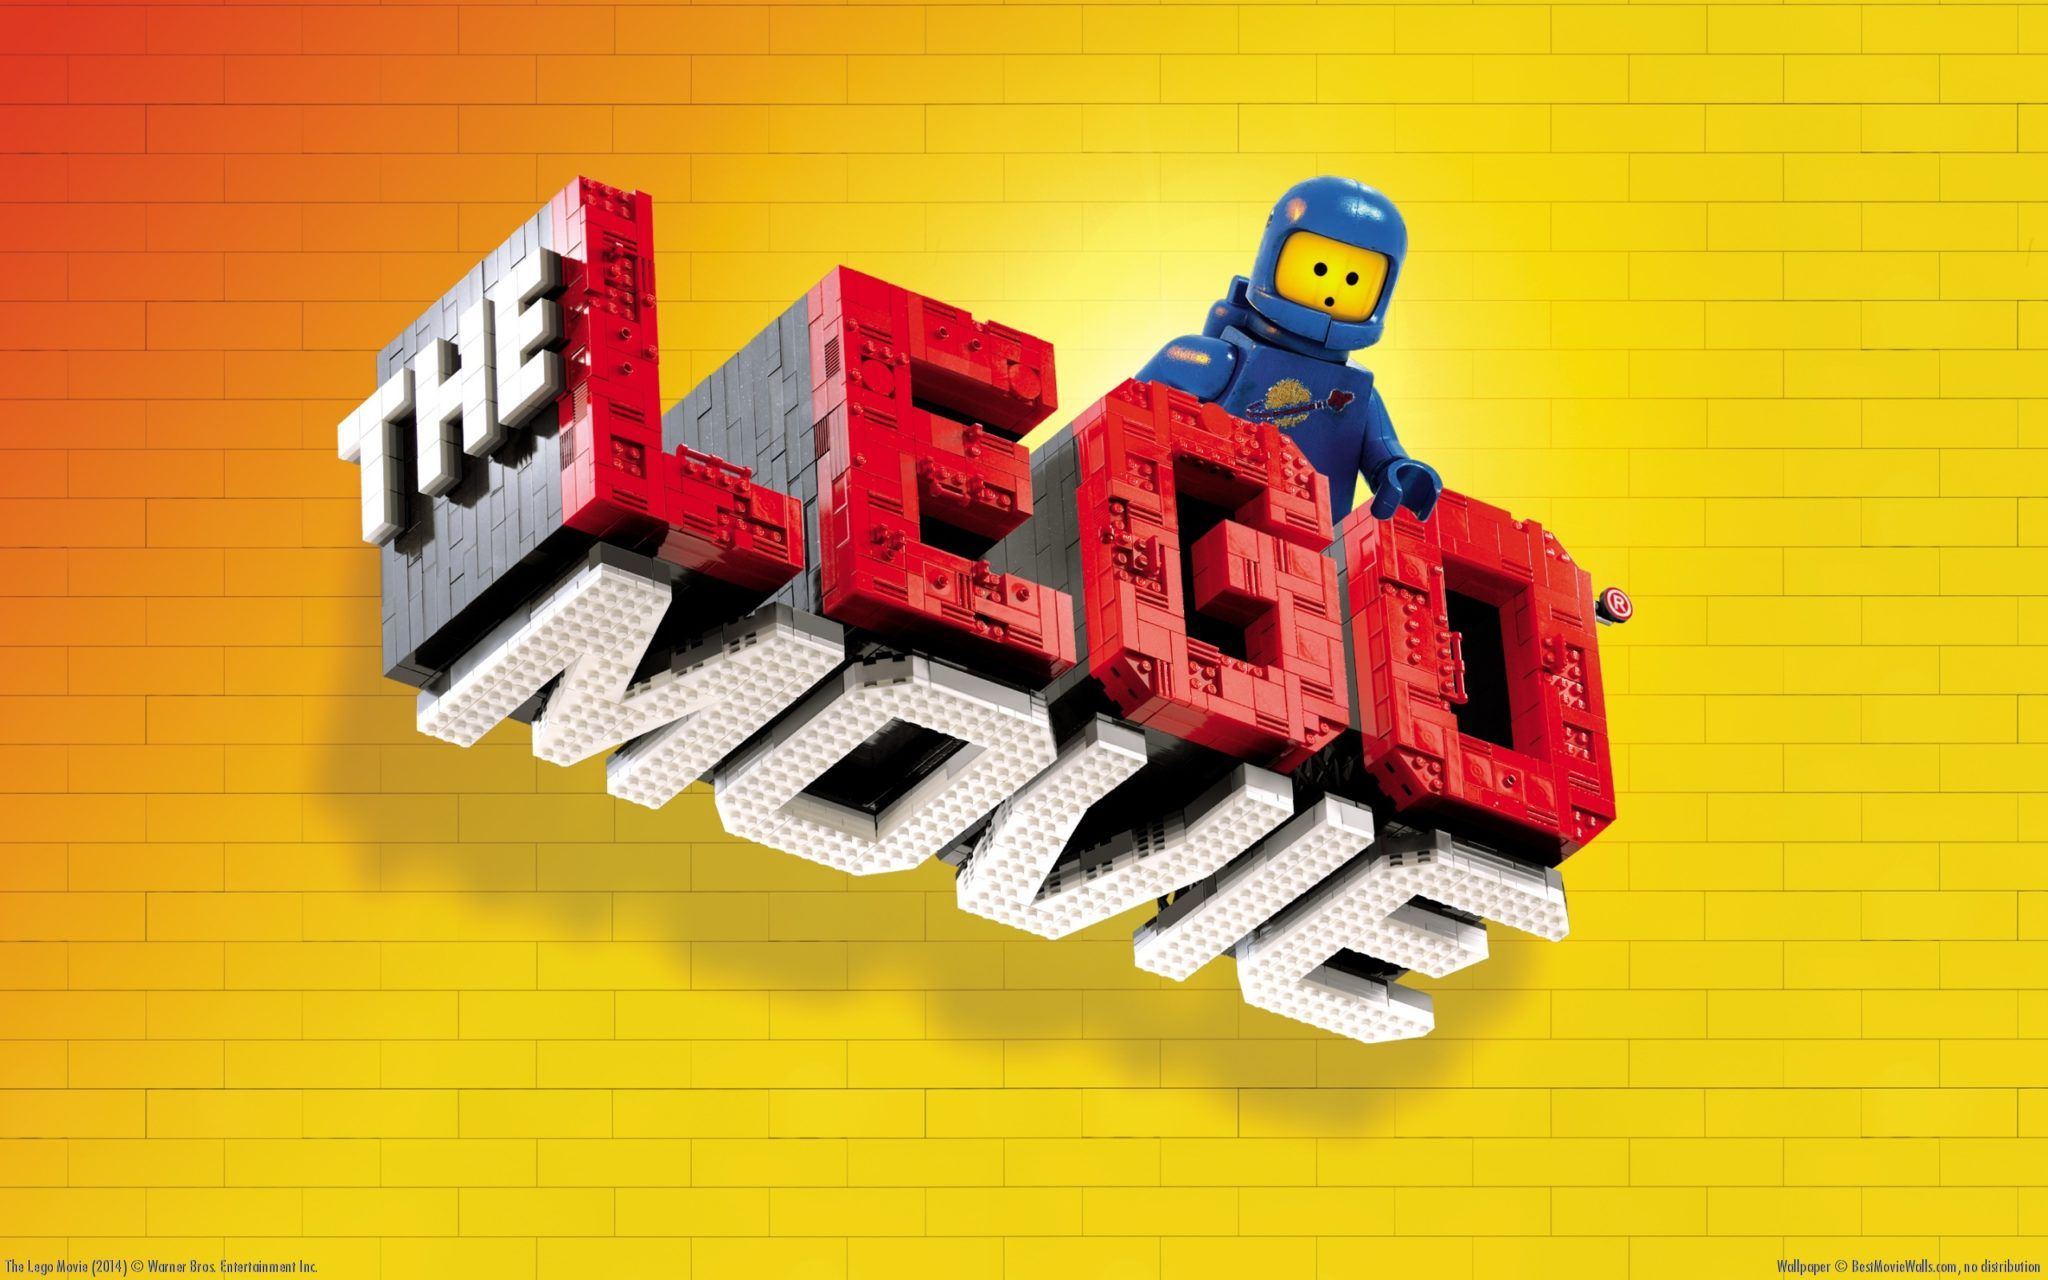 Everything is Awesome about These 'The Lego Movie' Wallpaper [CONTEST]